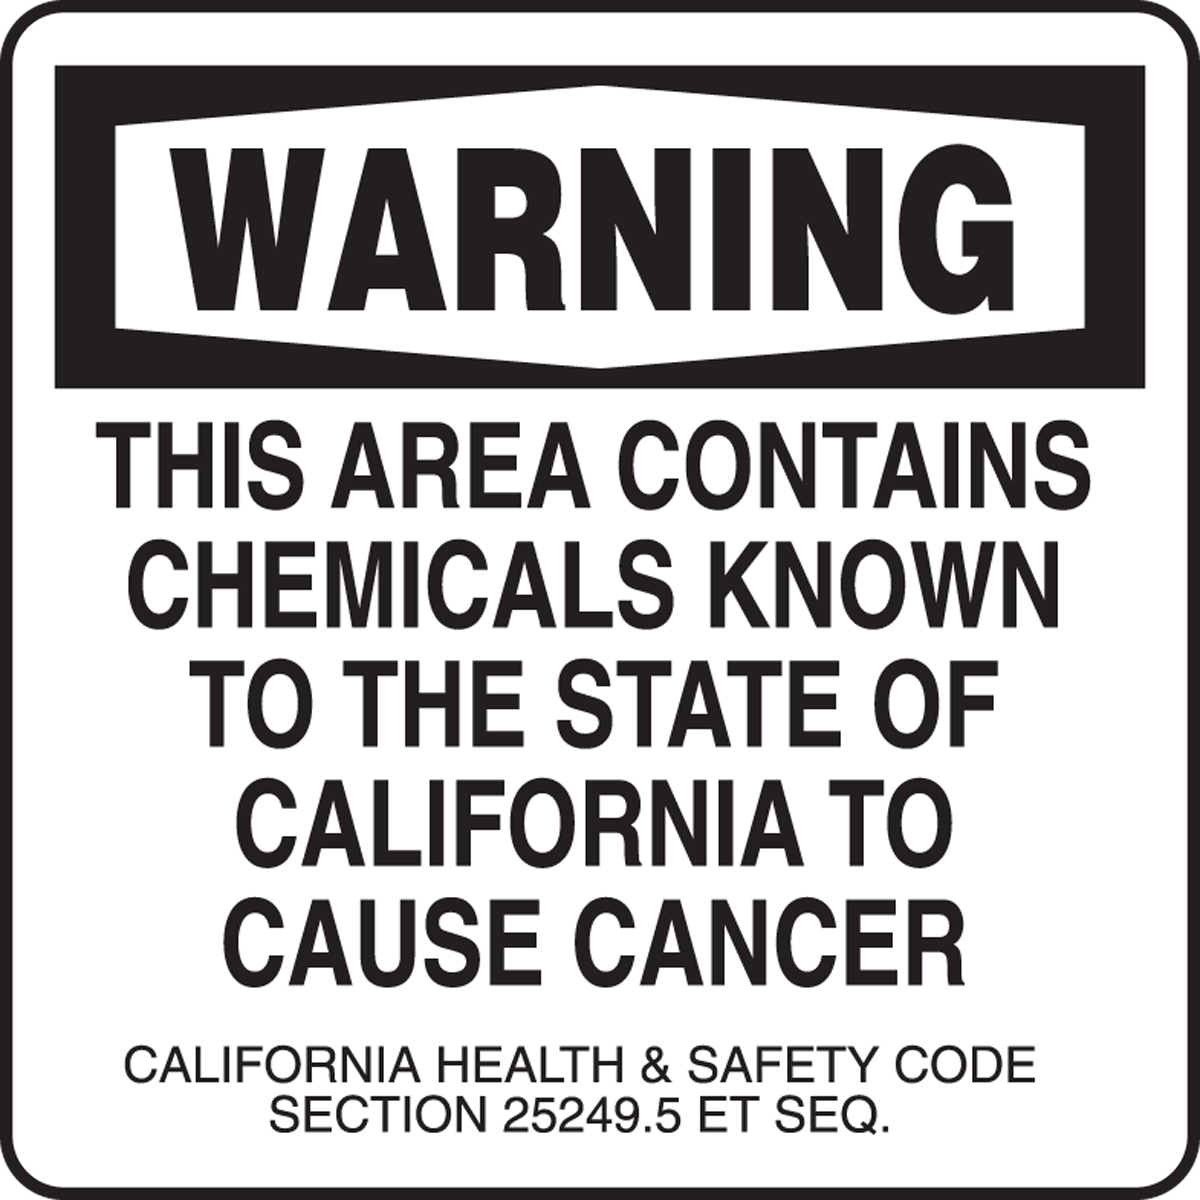 THIS AREA CONTAINS CHEMICALS KNOWN TO THE STATE OF CALIFORNIA TO CAUSE CANCER CALIFORNIA HEALTH & SAFETY CODE SECTION 25249.5 SEQ.